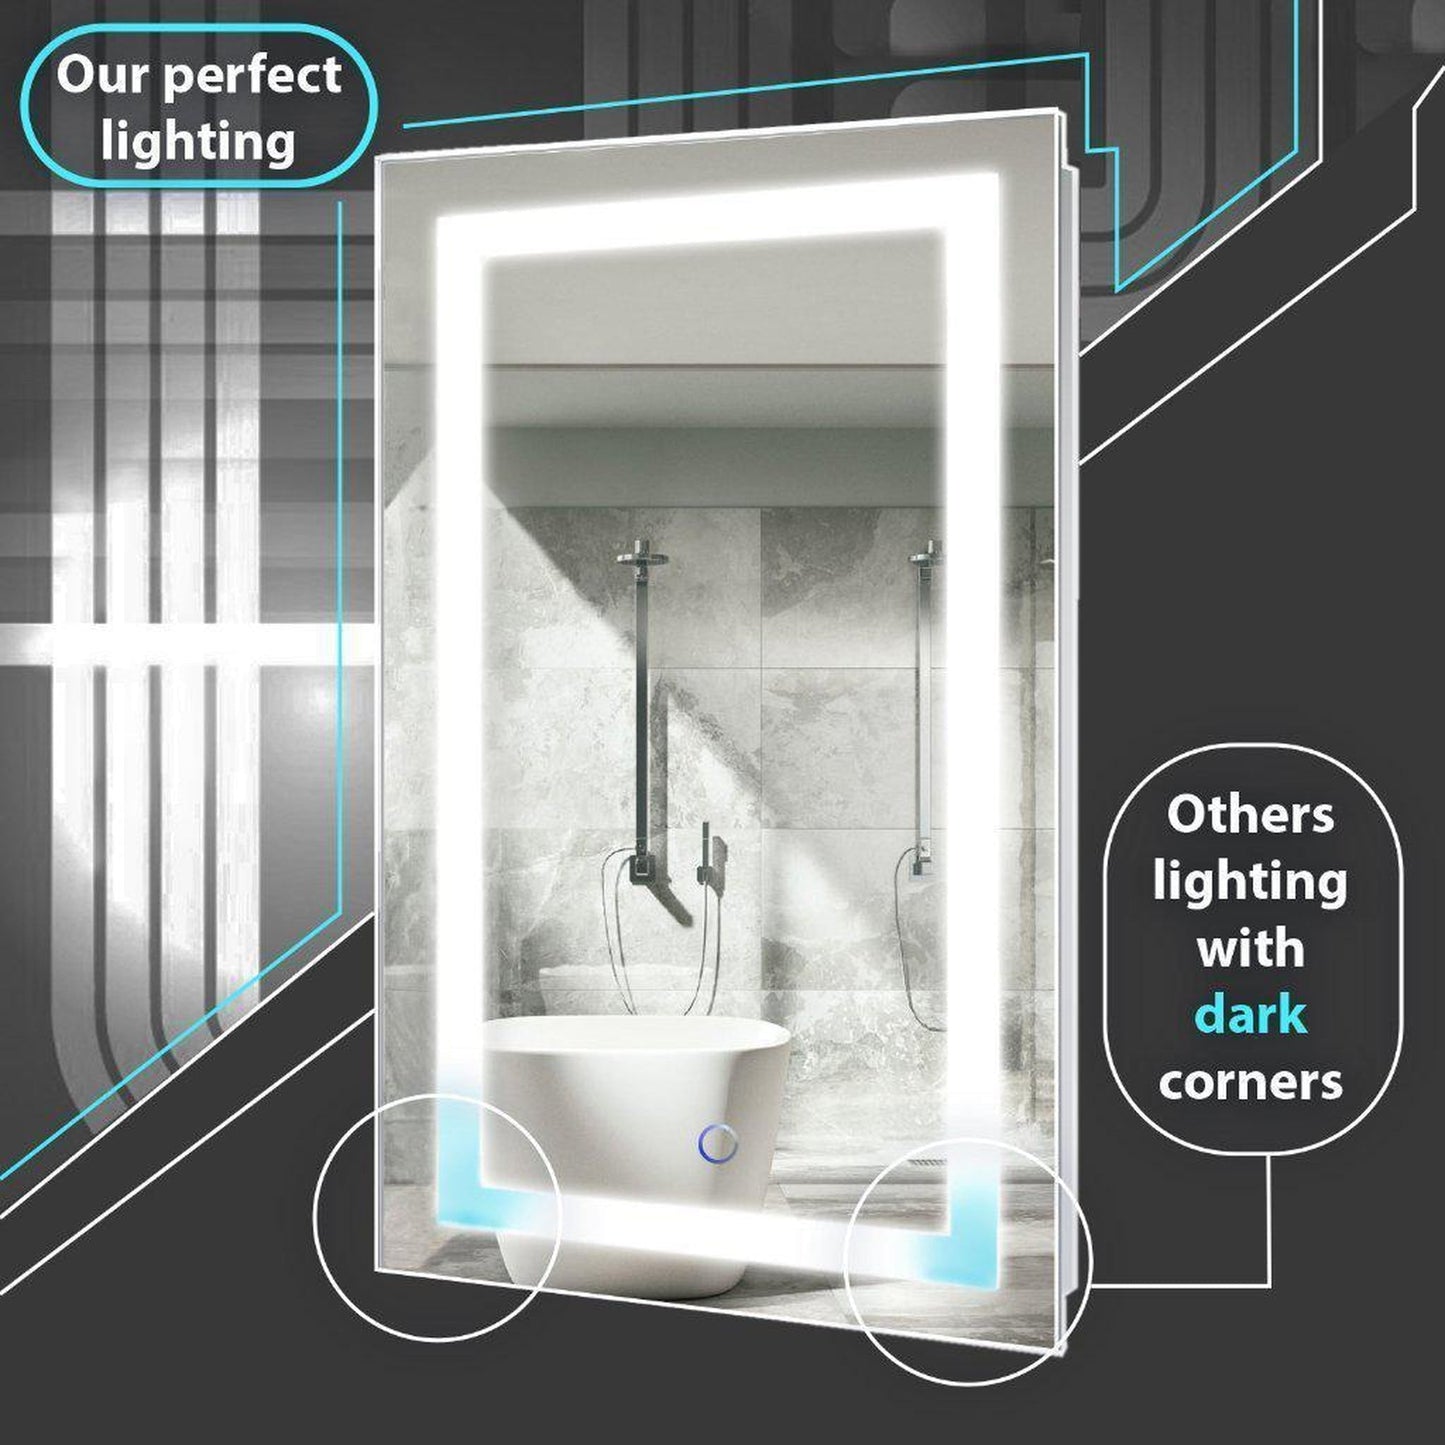 Krugg Reflections Sol 30" x 30" 5000K Round Wall-Mounted Illuminated Silver Backed LED Mirror With Built-in Defogger and Touch Sensor On/Off Built-in Dimmer